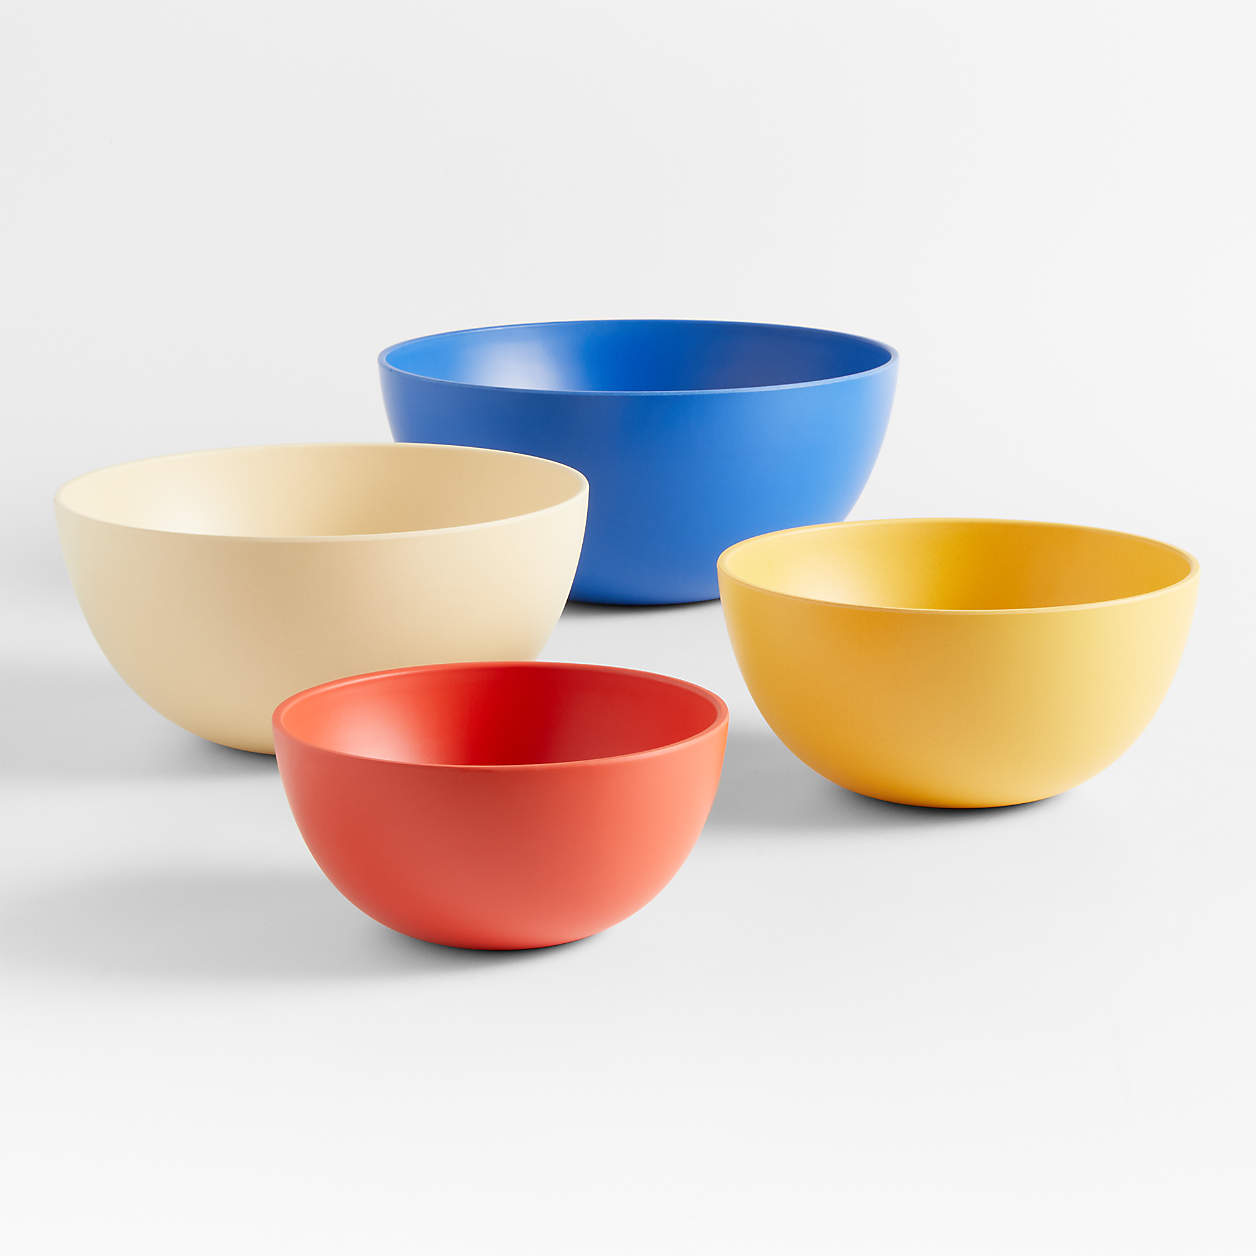 Set of 4 Bamboo Melamine Mixing Bowls by Molly Baz - Molly Baz Collection at Crate & Barrel
